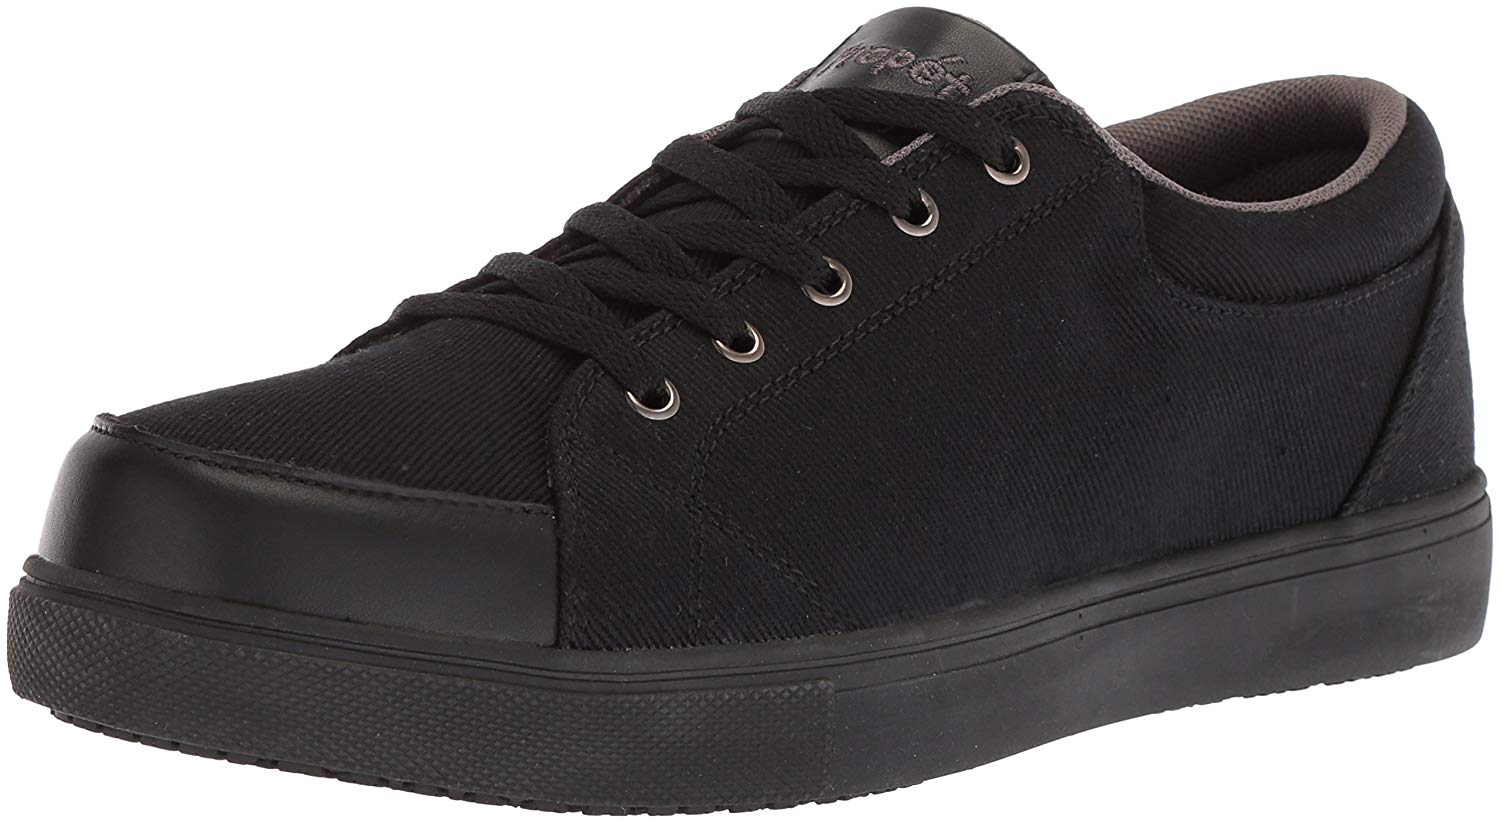 Propét Womens Ollie Low Top Lace Up Fashion Sneakers, Black, Size 11.5 ...